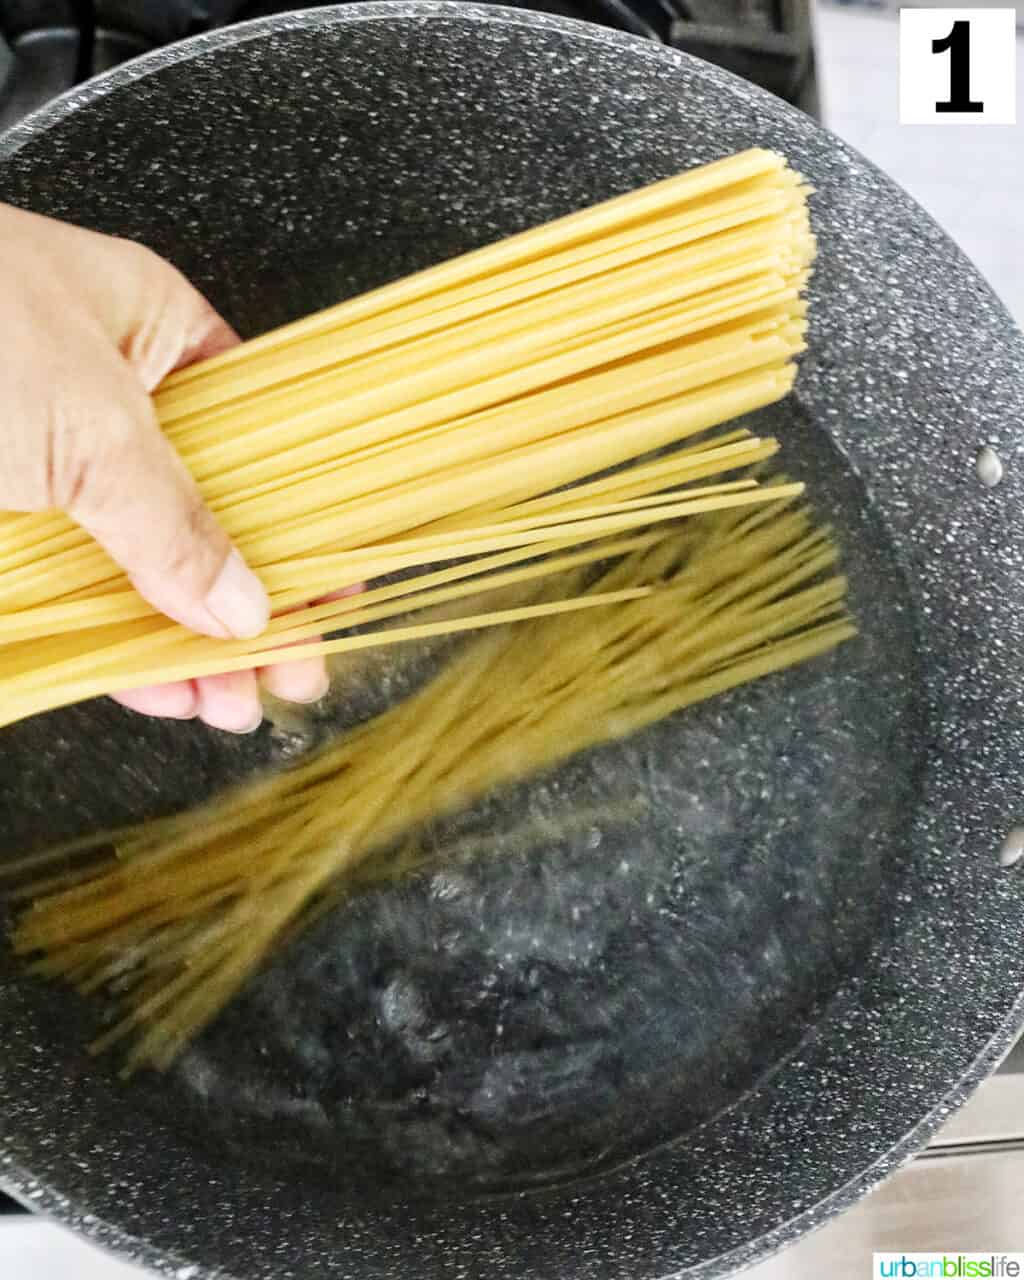 hand lowering linguine pasta into a large pot of water.